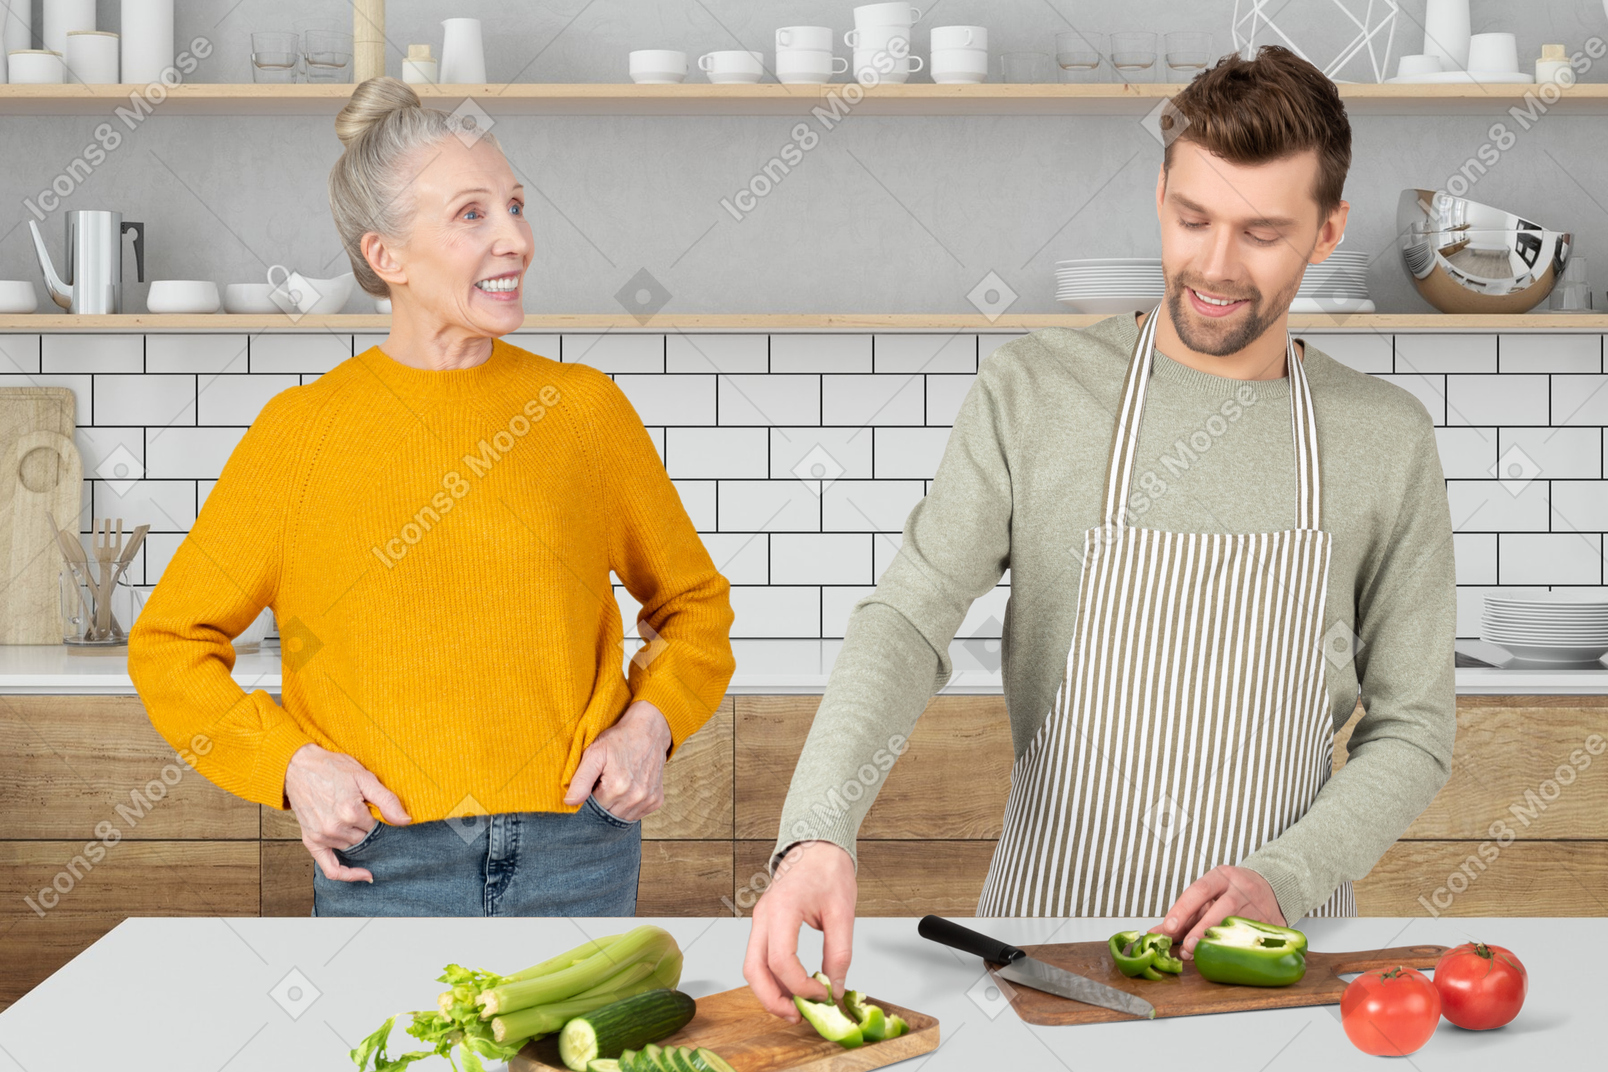 A man preparing food with an older woman